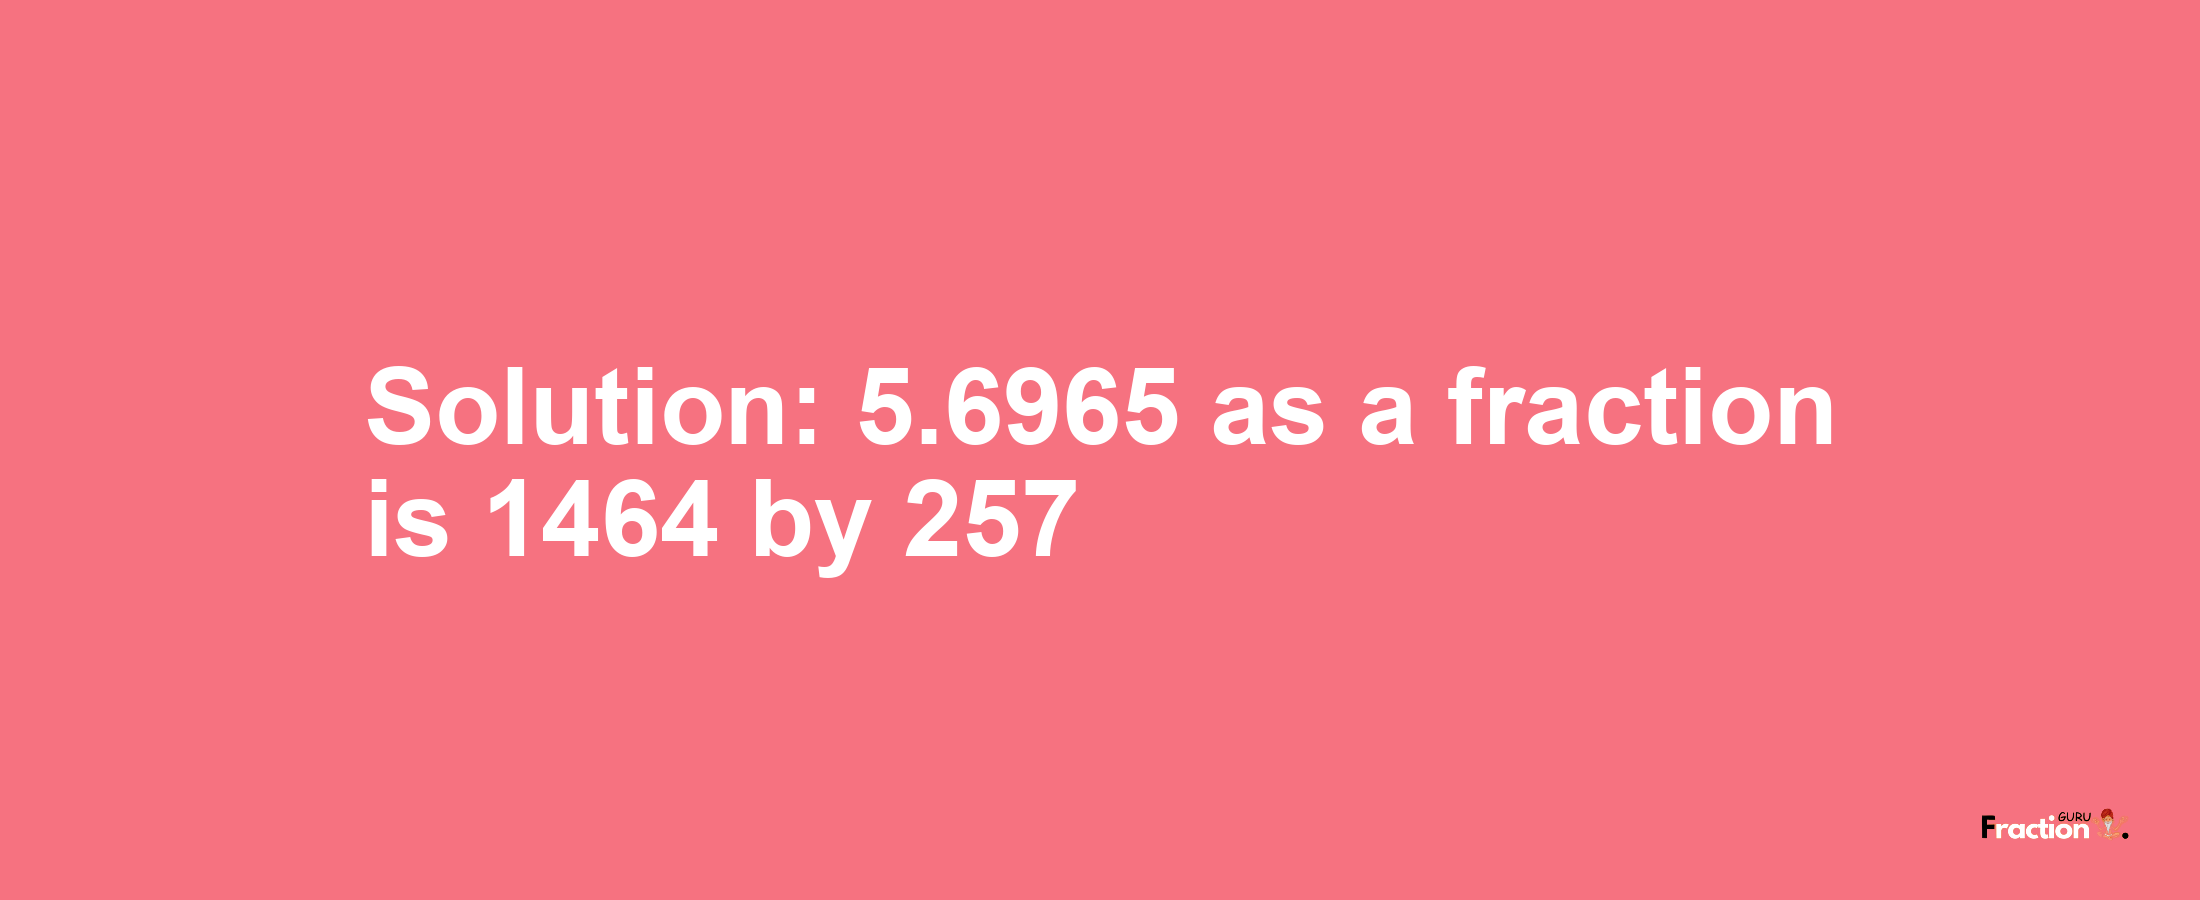 Solution:5.6965 as a fraction is 1464/257